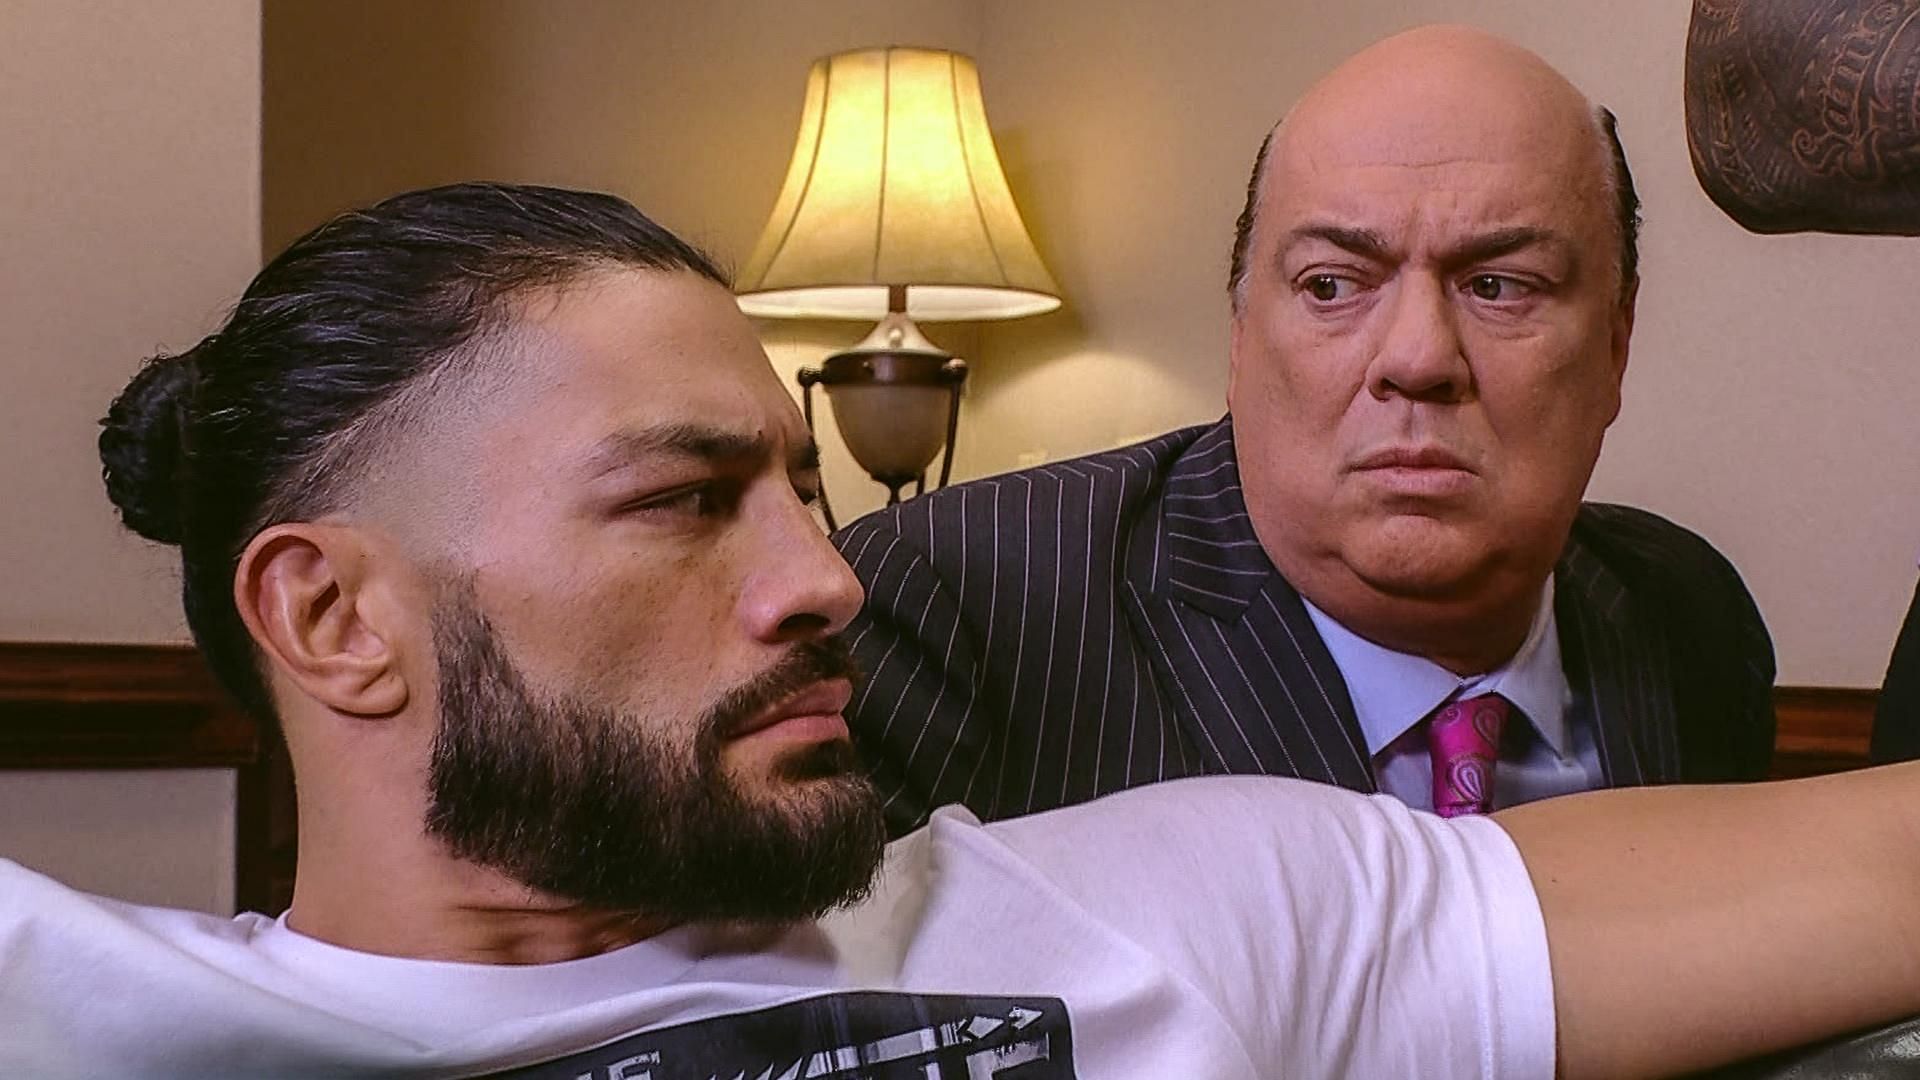 Roman Reigns and his special counsel Paul Heyman